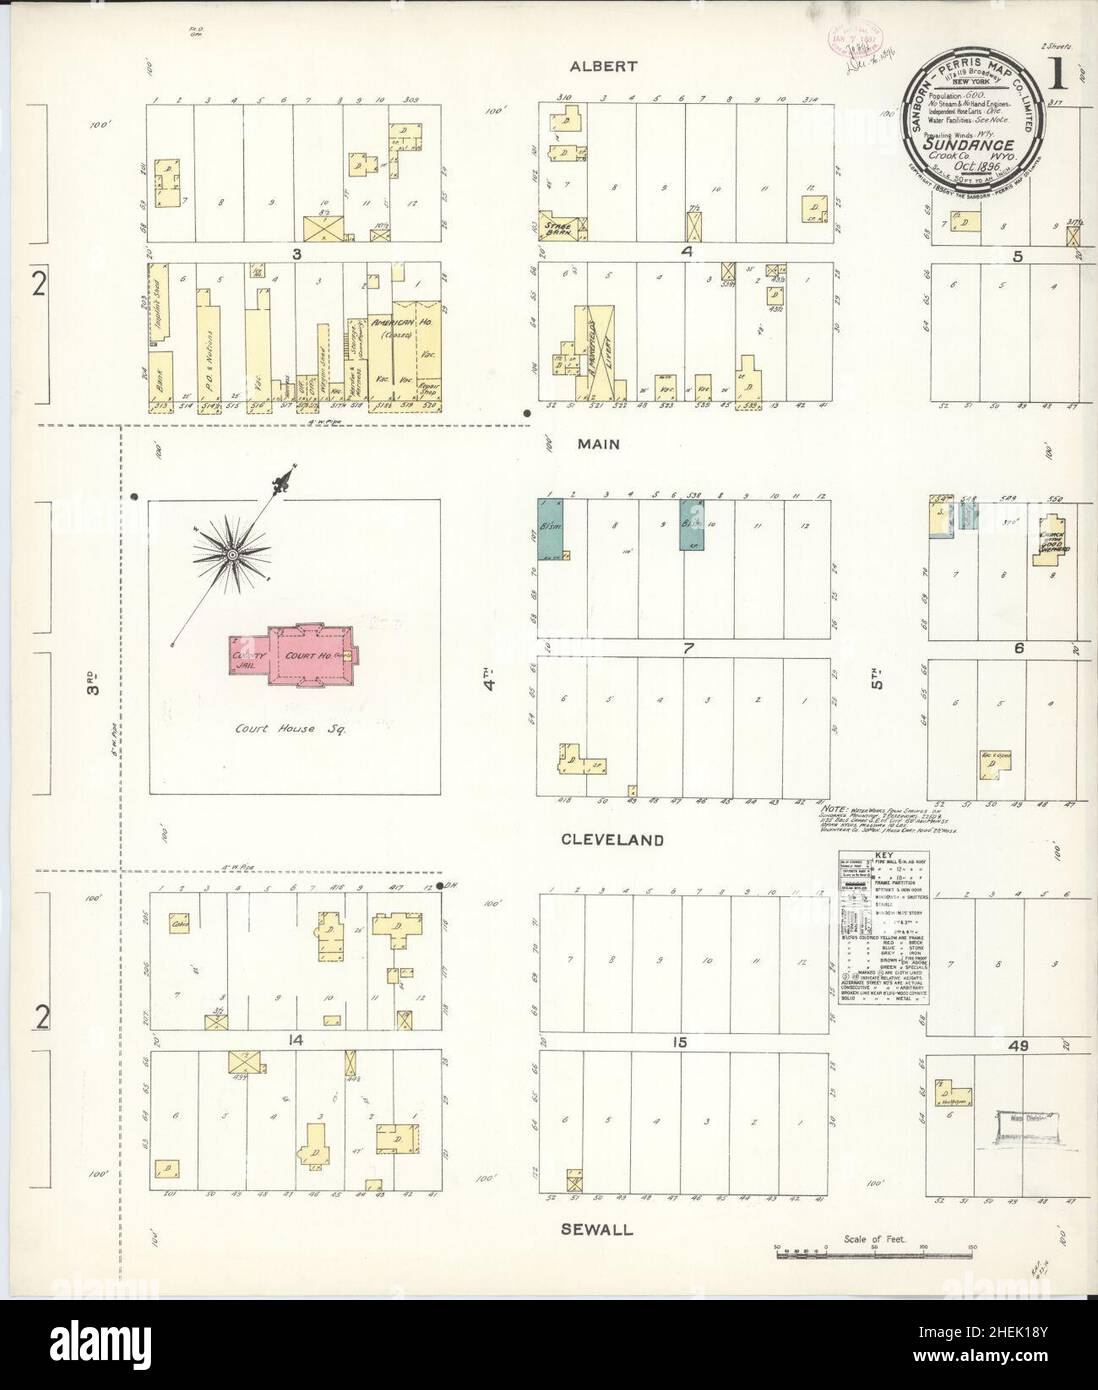 Sanborn Fire Insurance Map from Sundance, Crook County, Wyoming. Stock Photo